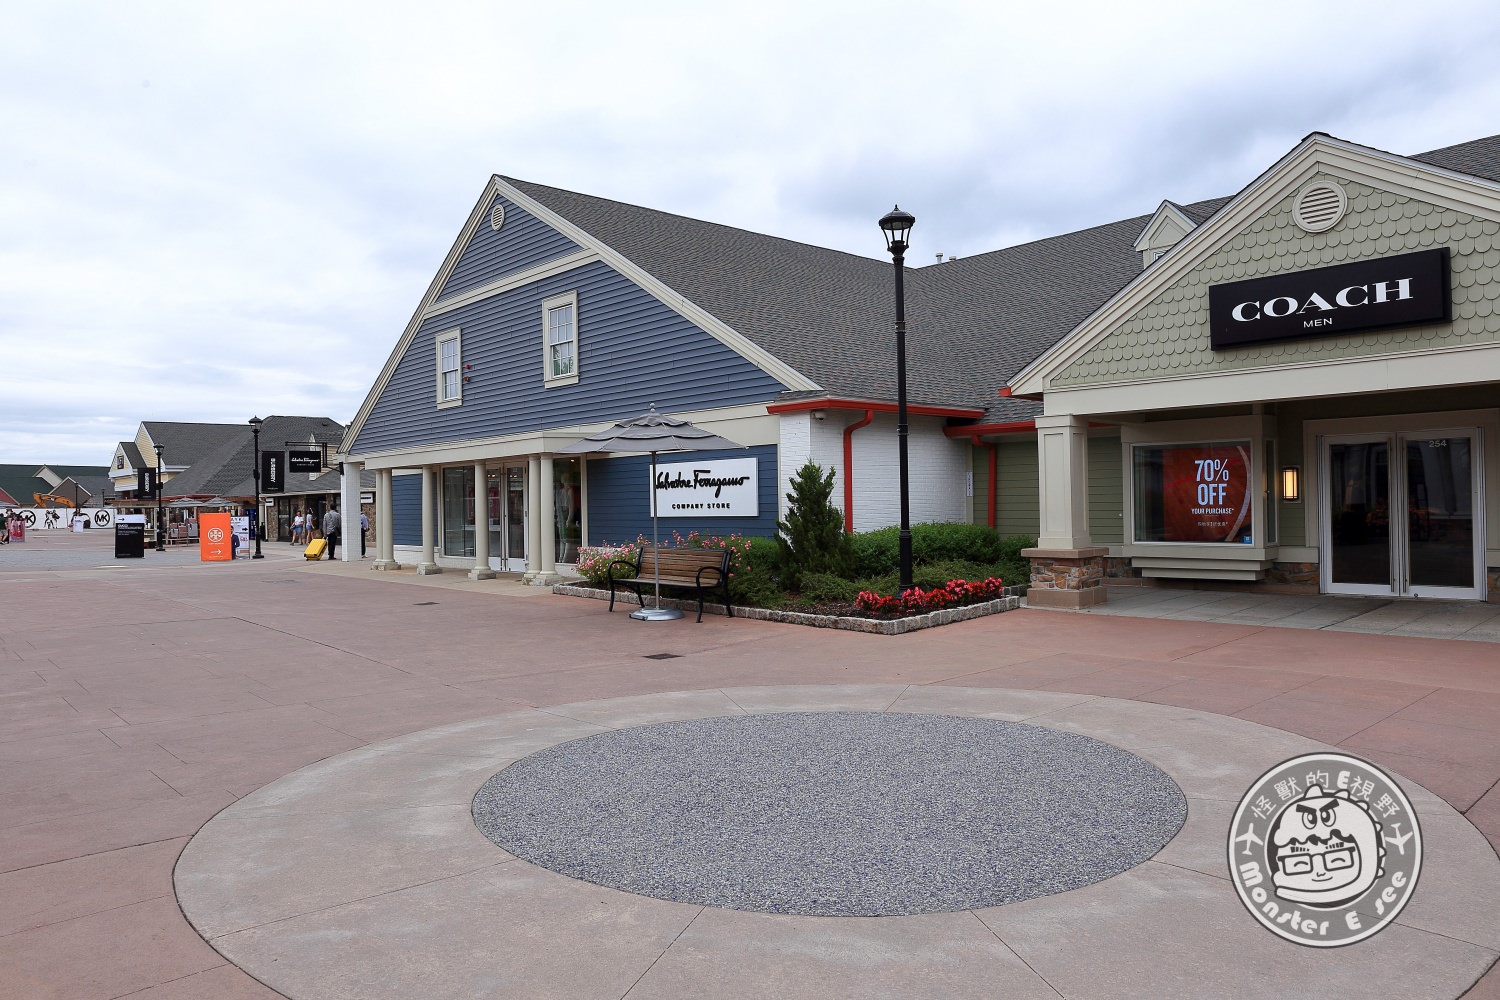 Woodbury Common Premium Outlets22